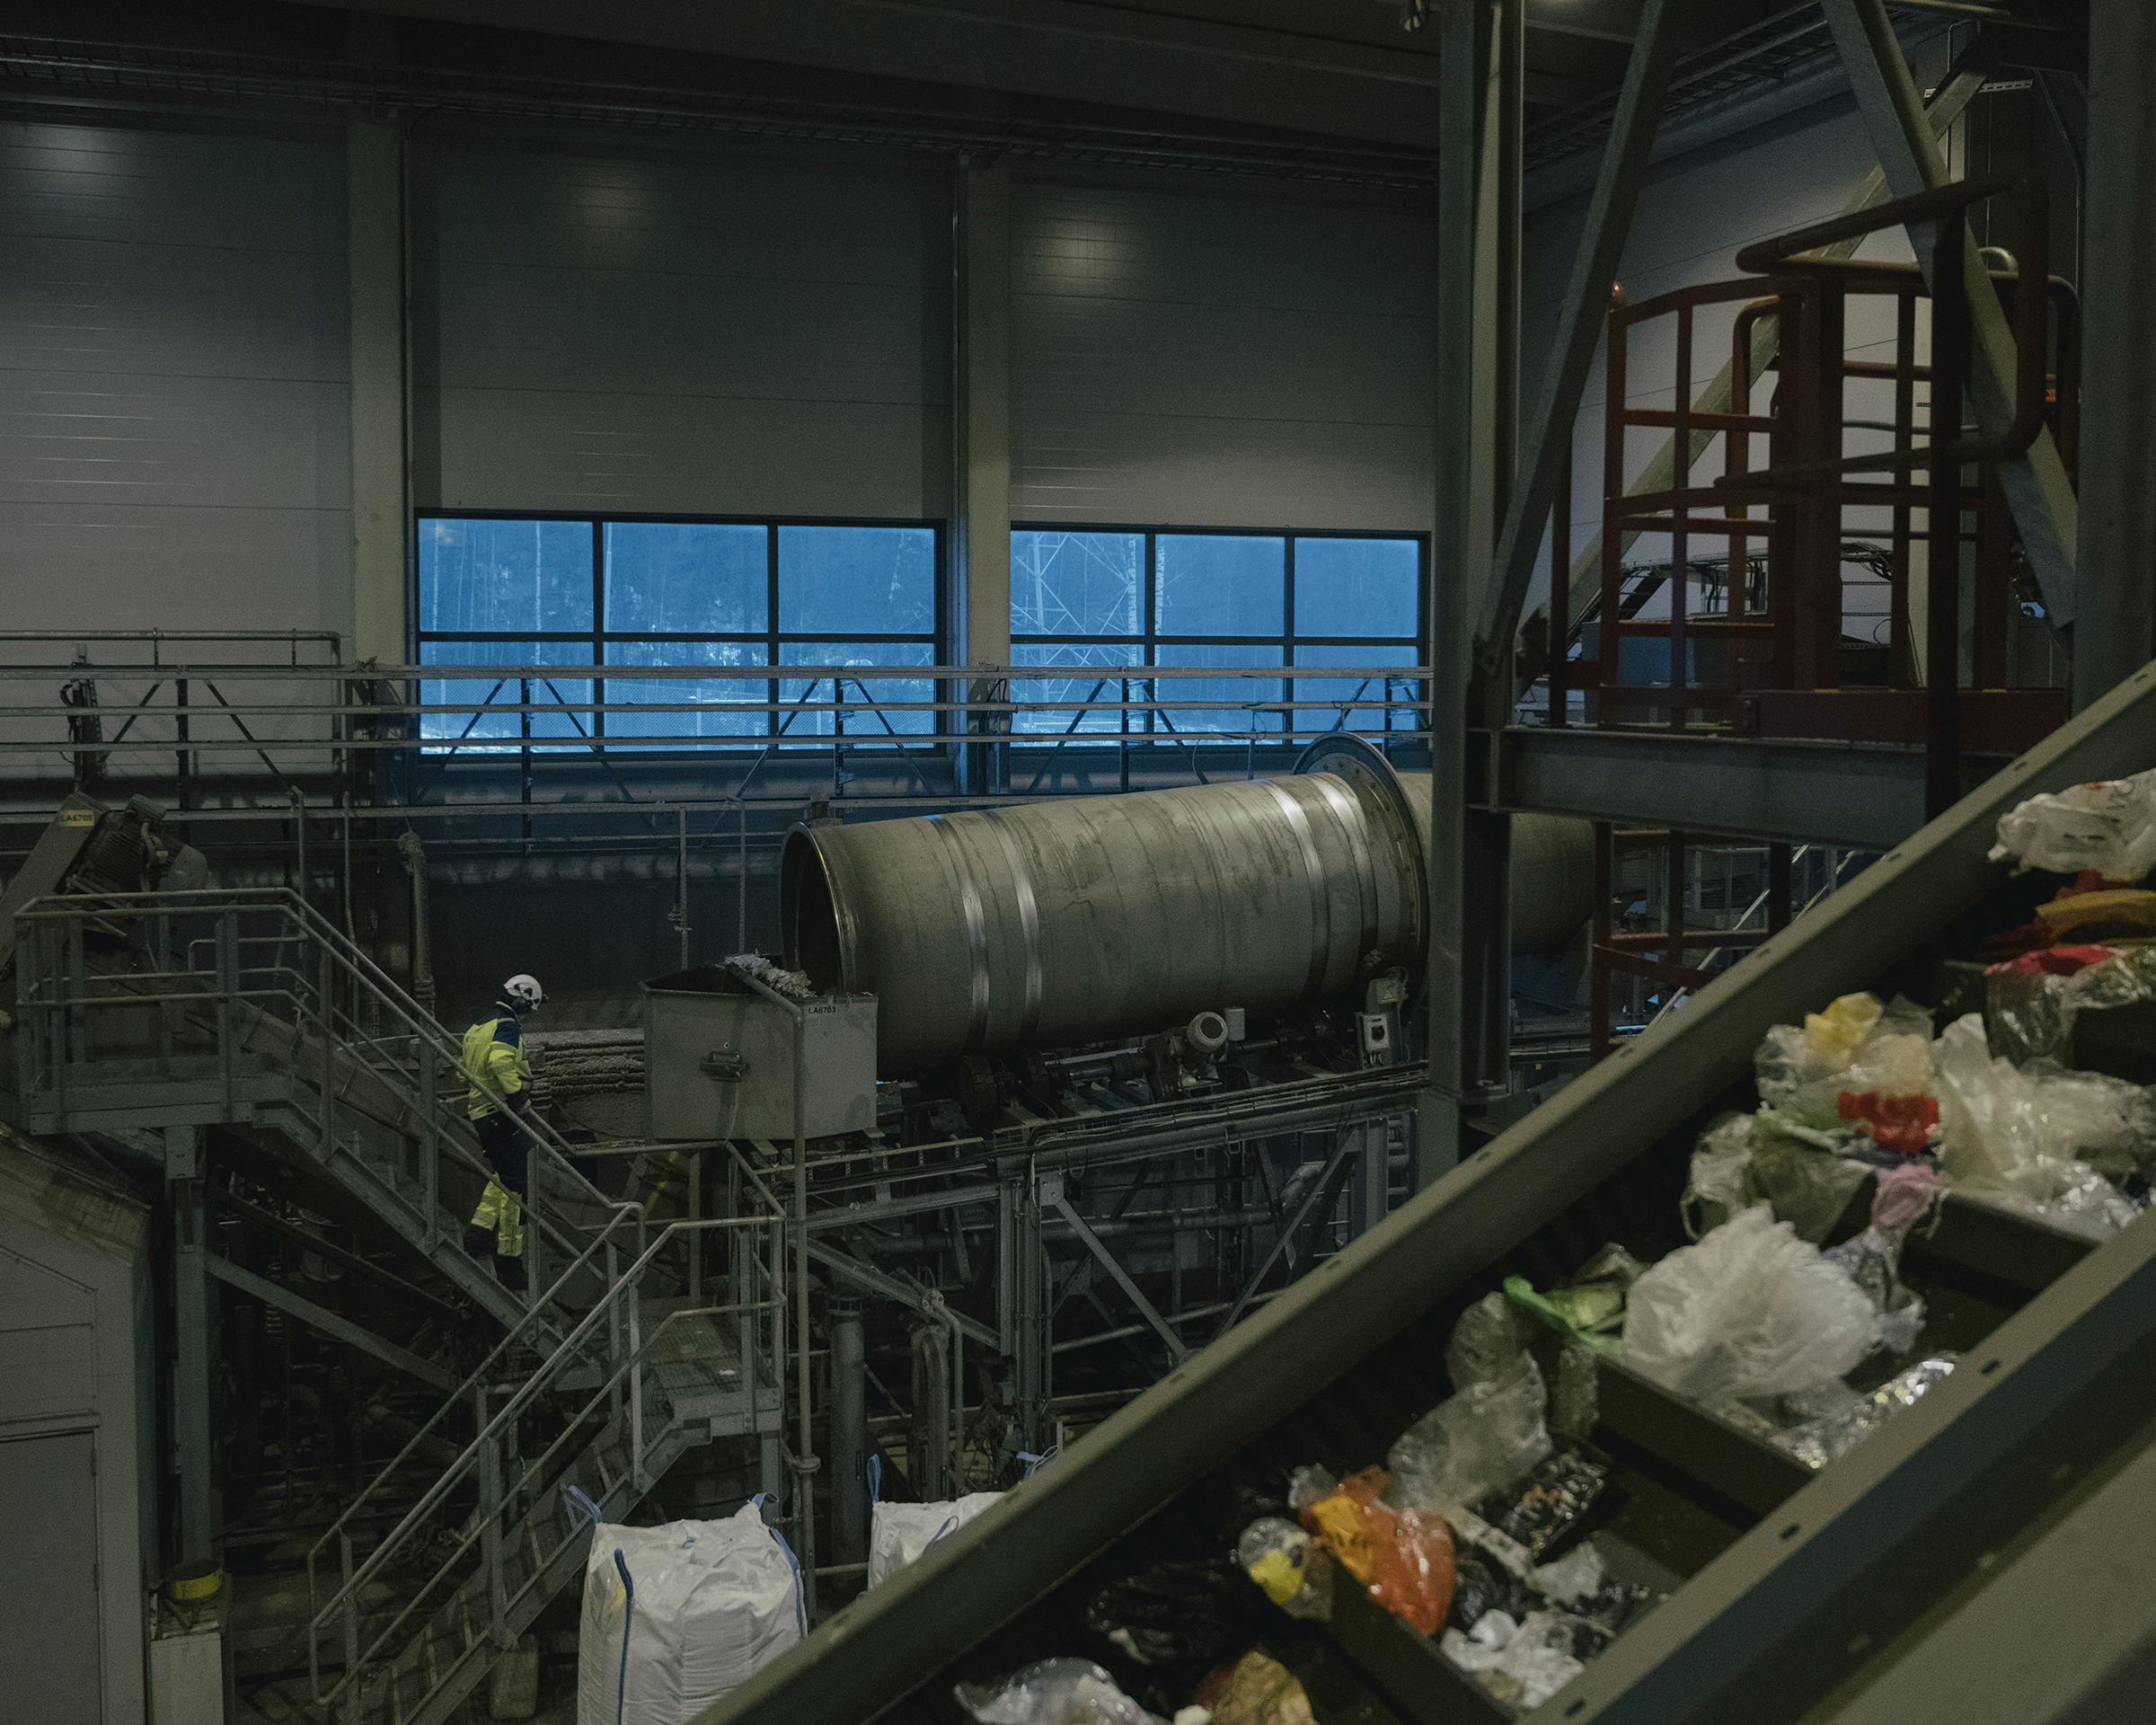 Fortum Waste Solutions Oy's <a href="https://time.com/6132391/finland-end-waste/">circular economy</a> facility in Häme, Finland on Dec. 14, 2021. Here, waste material collected from regular households is sorted automatically, and then made into reusable plastic. (Ingmar Björn Nolting for TIME)